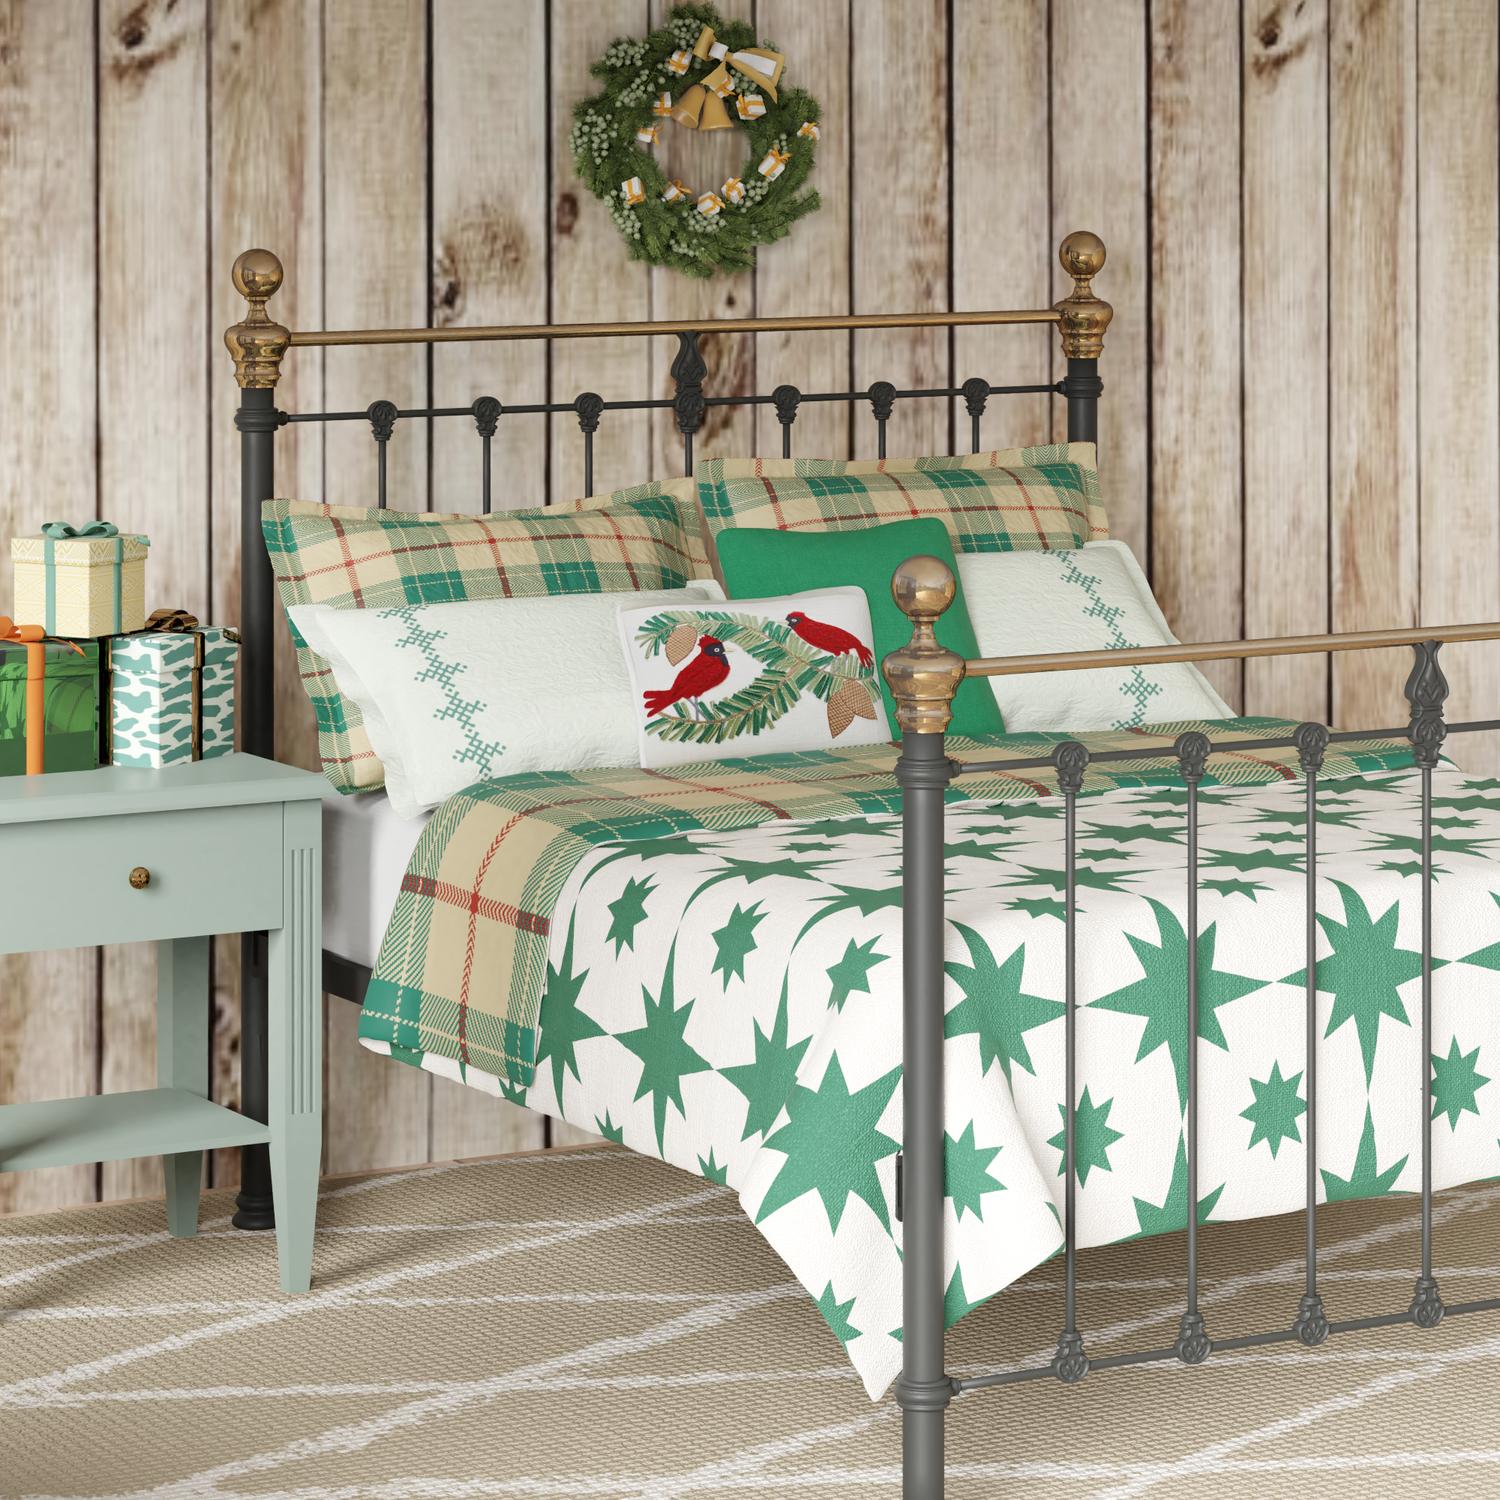 Hamilton iron bed - Image green and gold